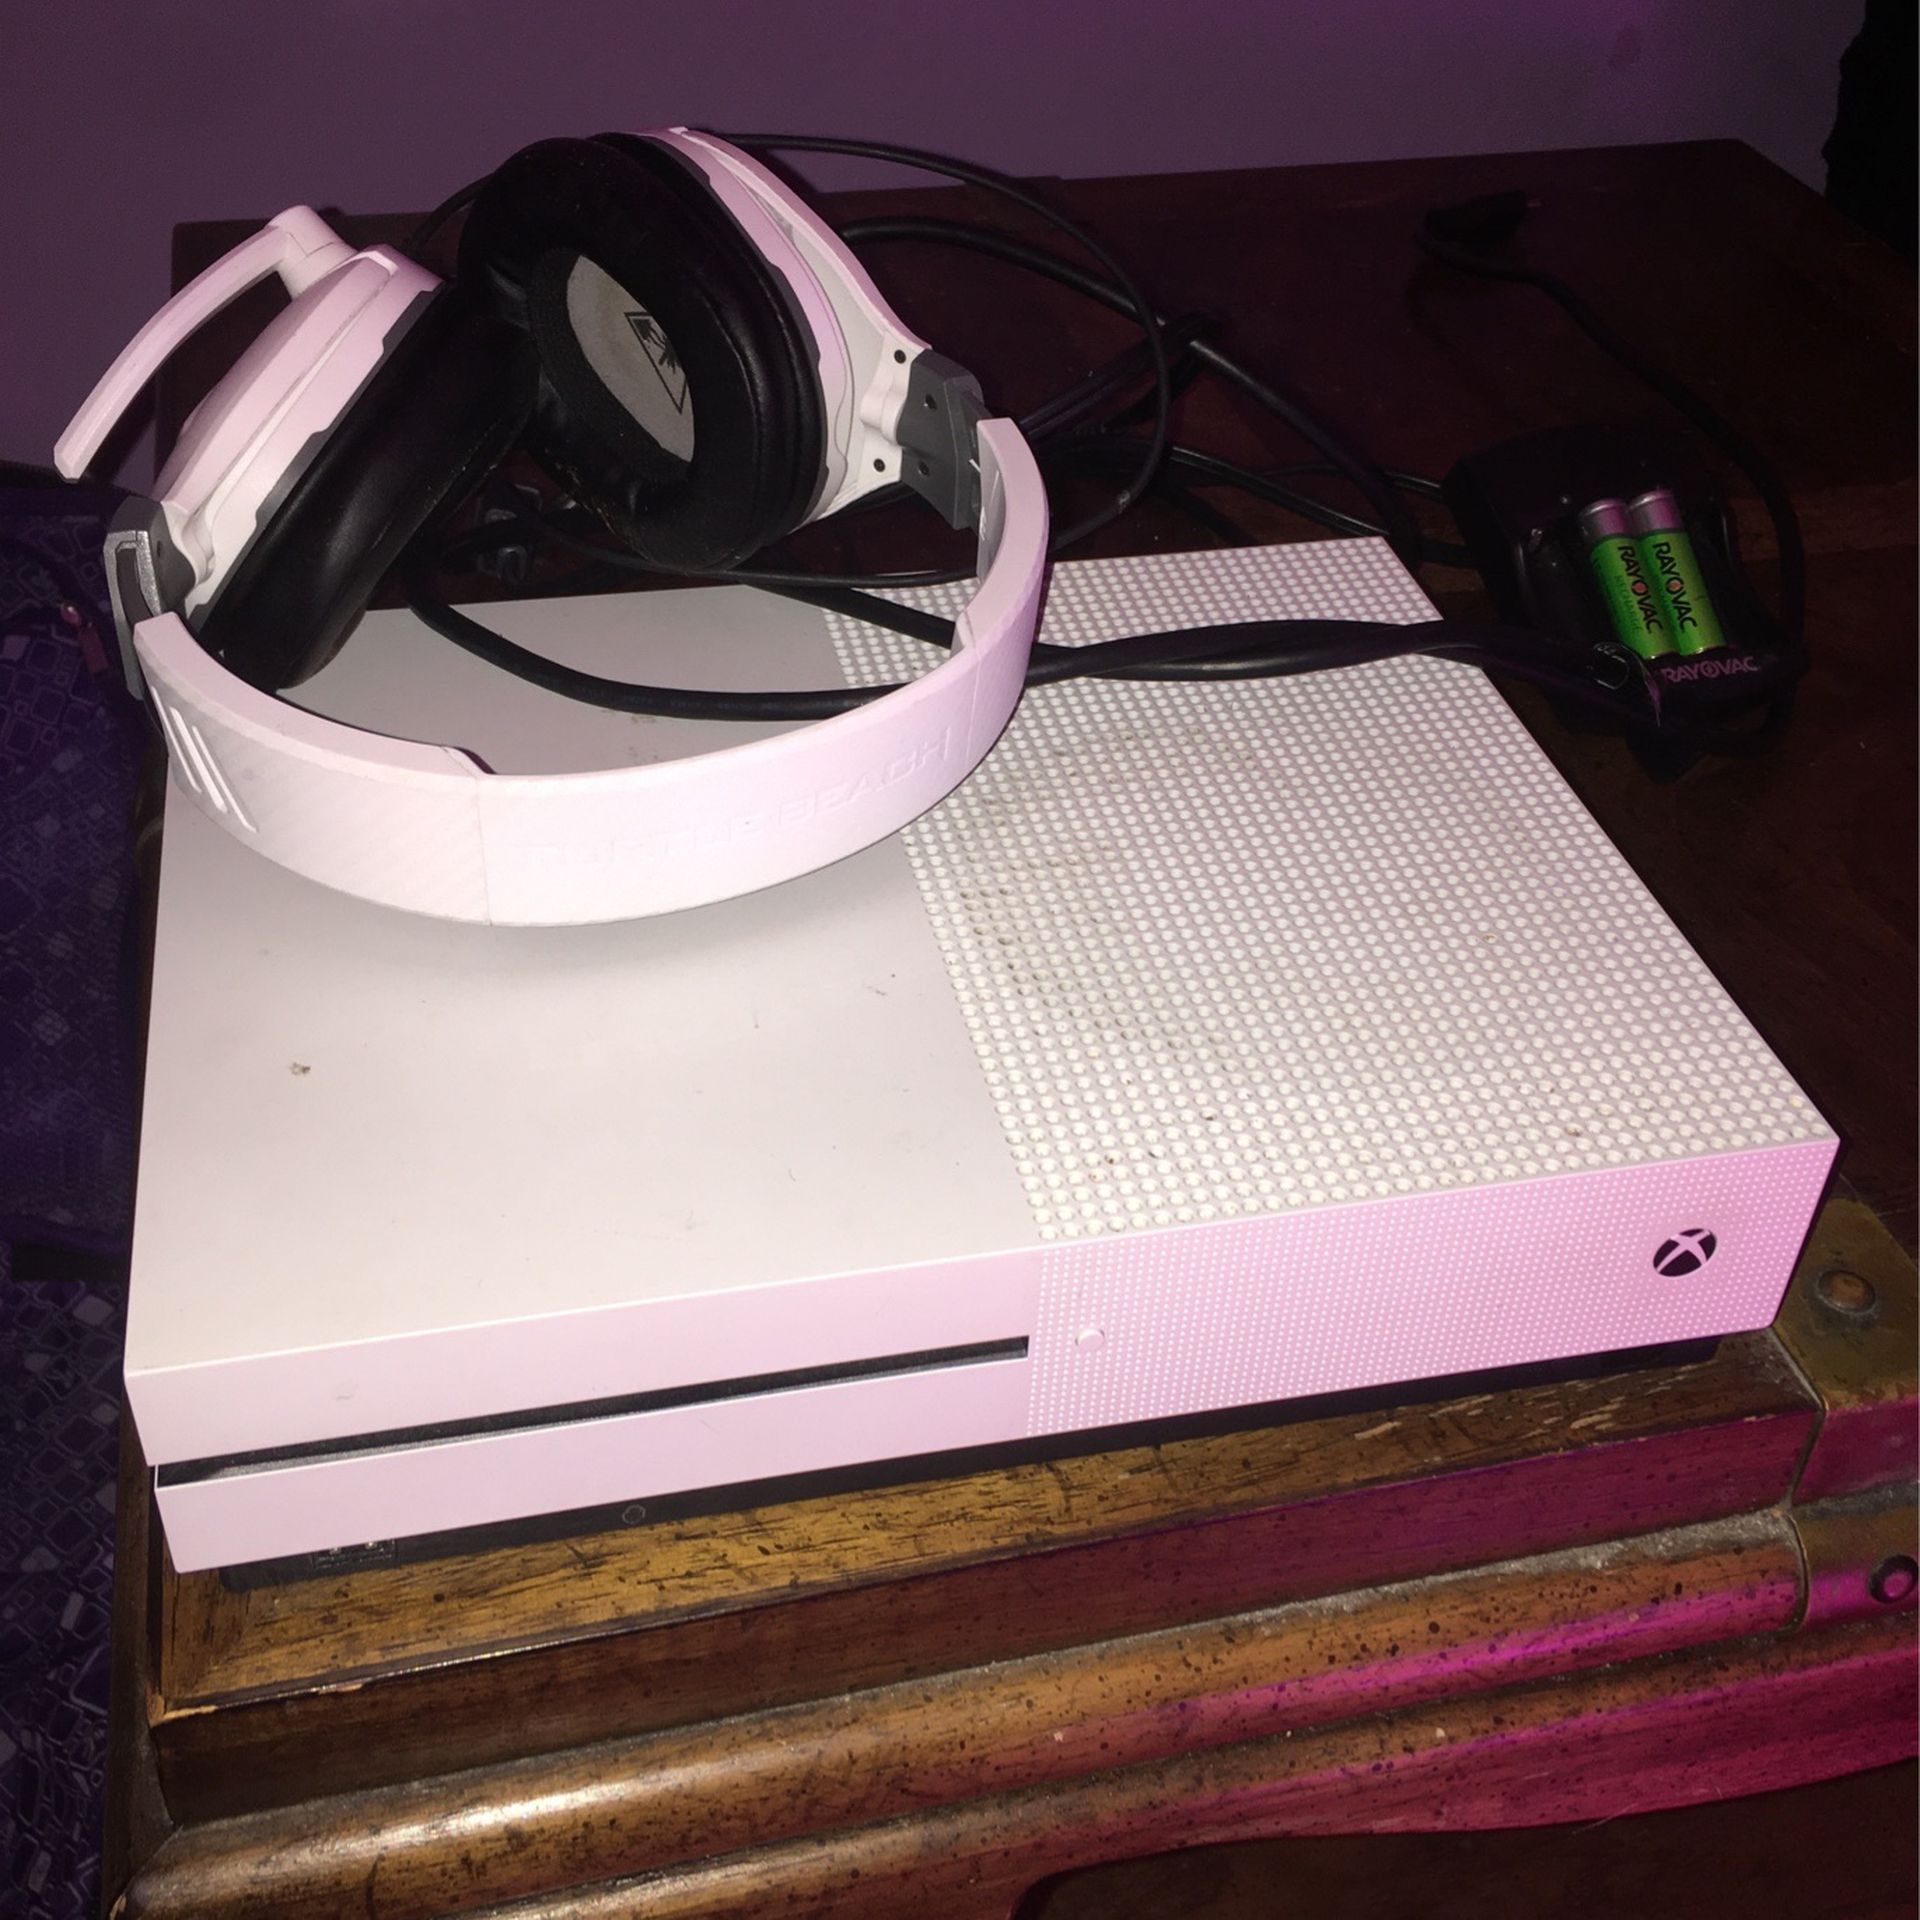 Xbox One S With Turtle Beach Stealth600 Gen 2 Headset